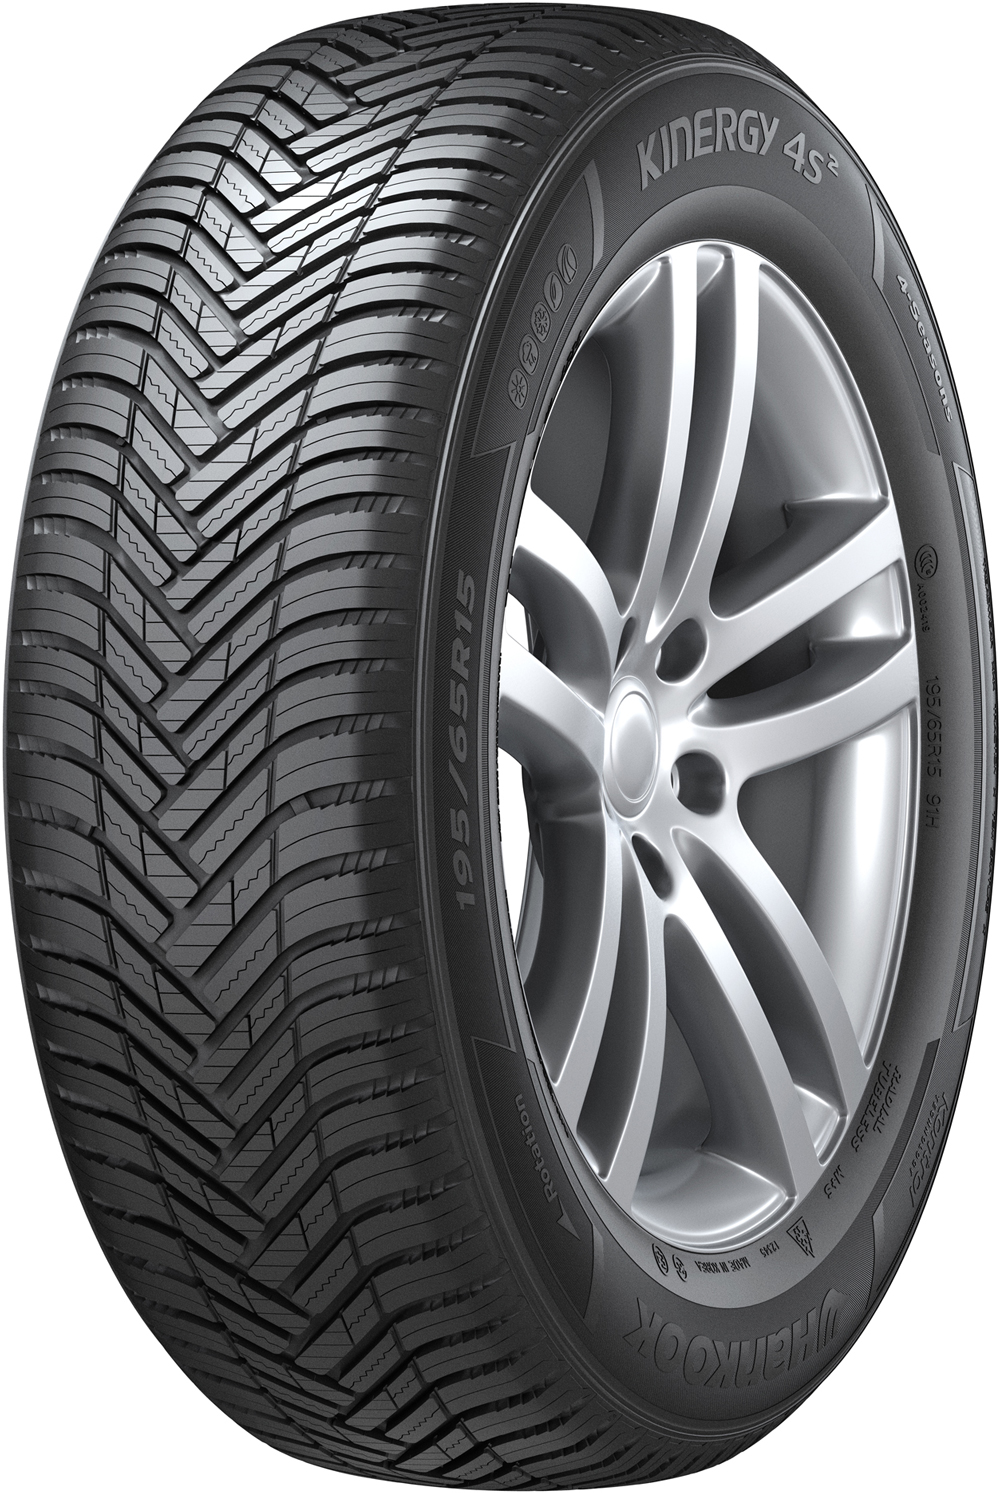 Anvelope auto HANKOOK H750B Kinergy 4S2 hrs XL RFT 225/45 R18 95Y